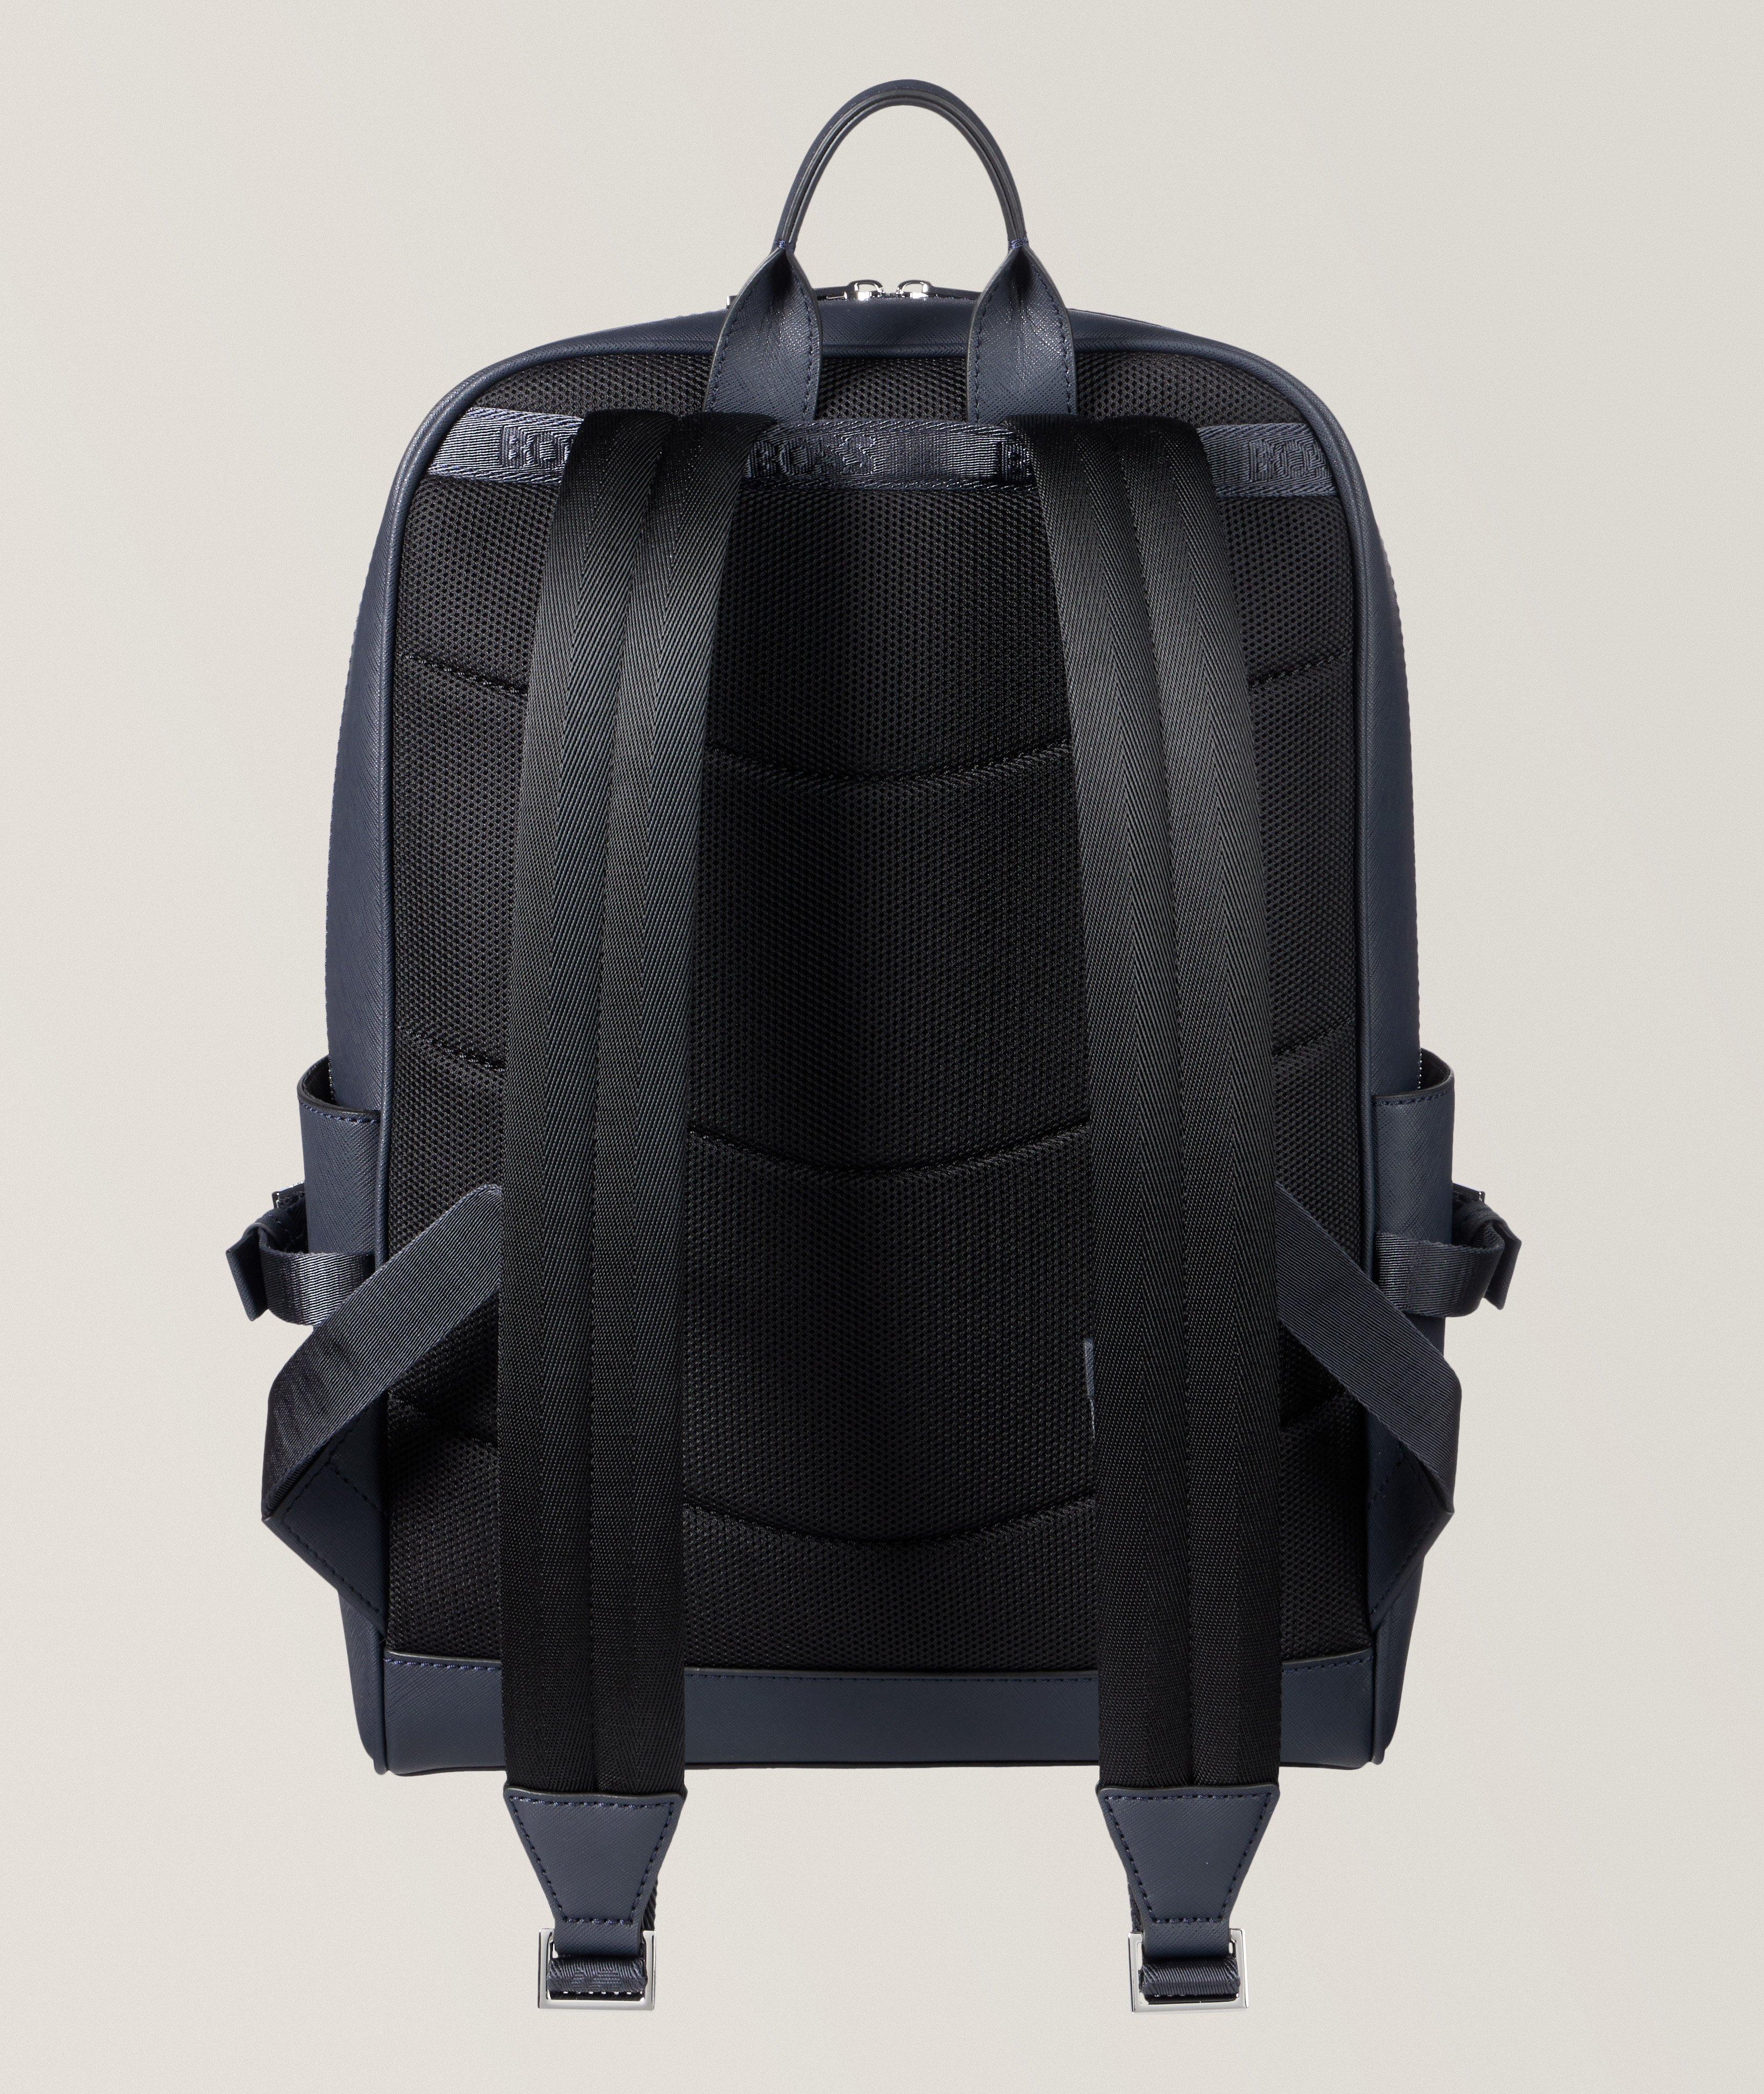 Zair Regenerated Leather Backpack image 1